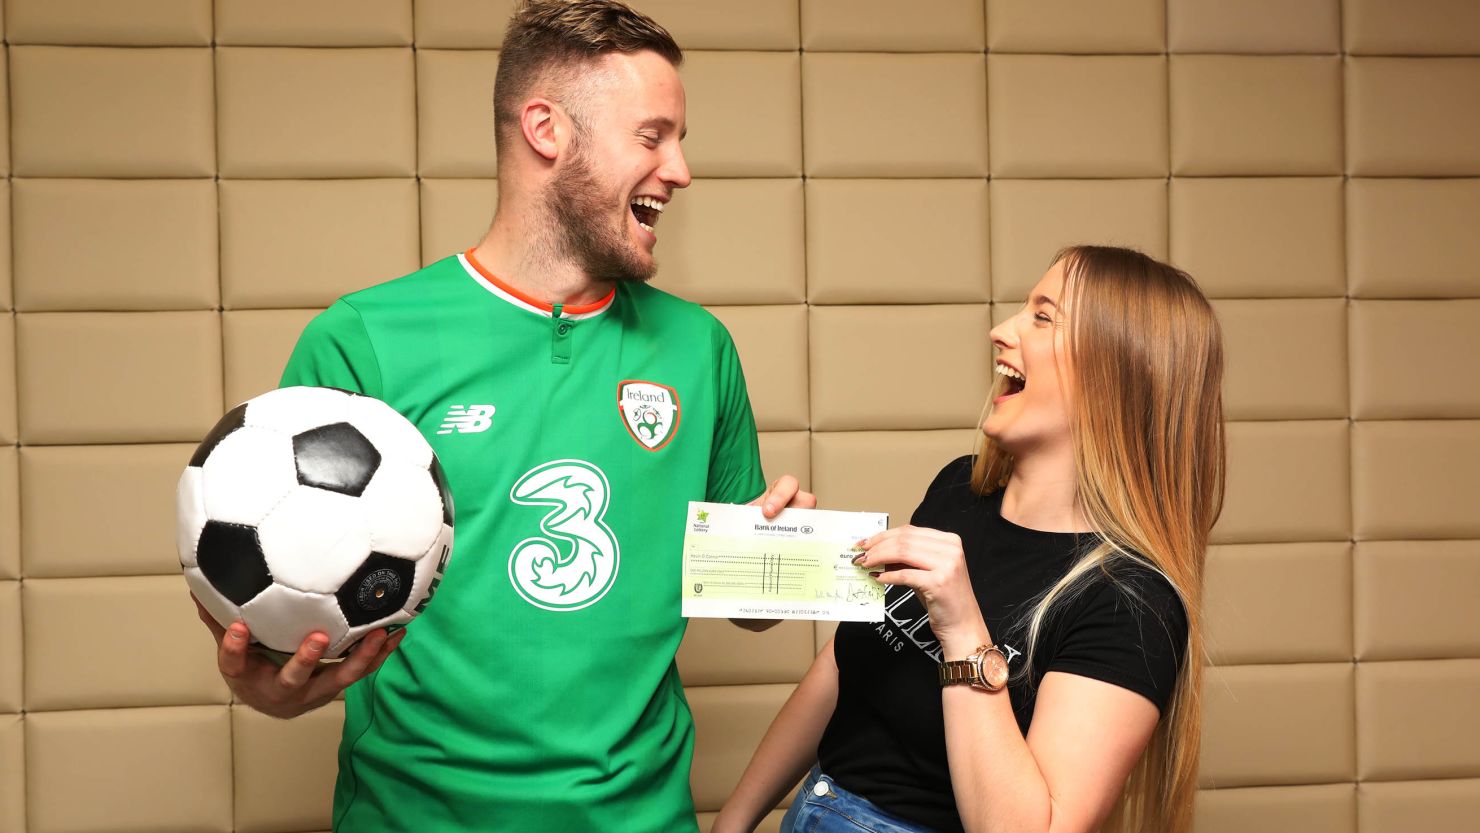 The defender won the top prize of €1,000,000 on the National Lottery's Millionaire Raffle draw which took place on New Year's Eve. 